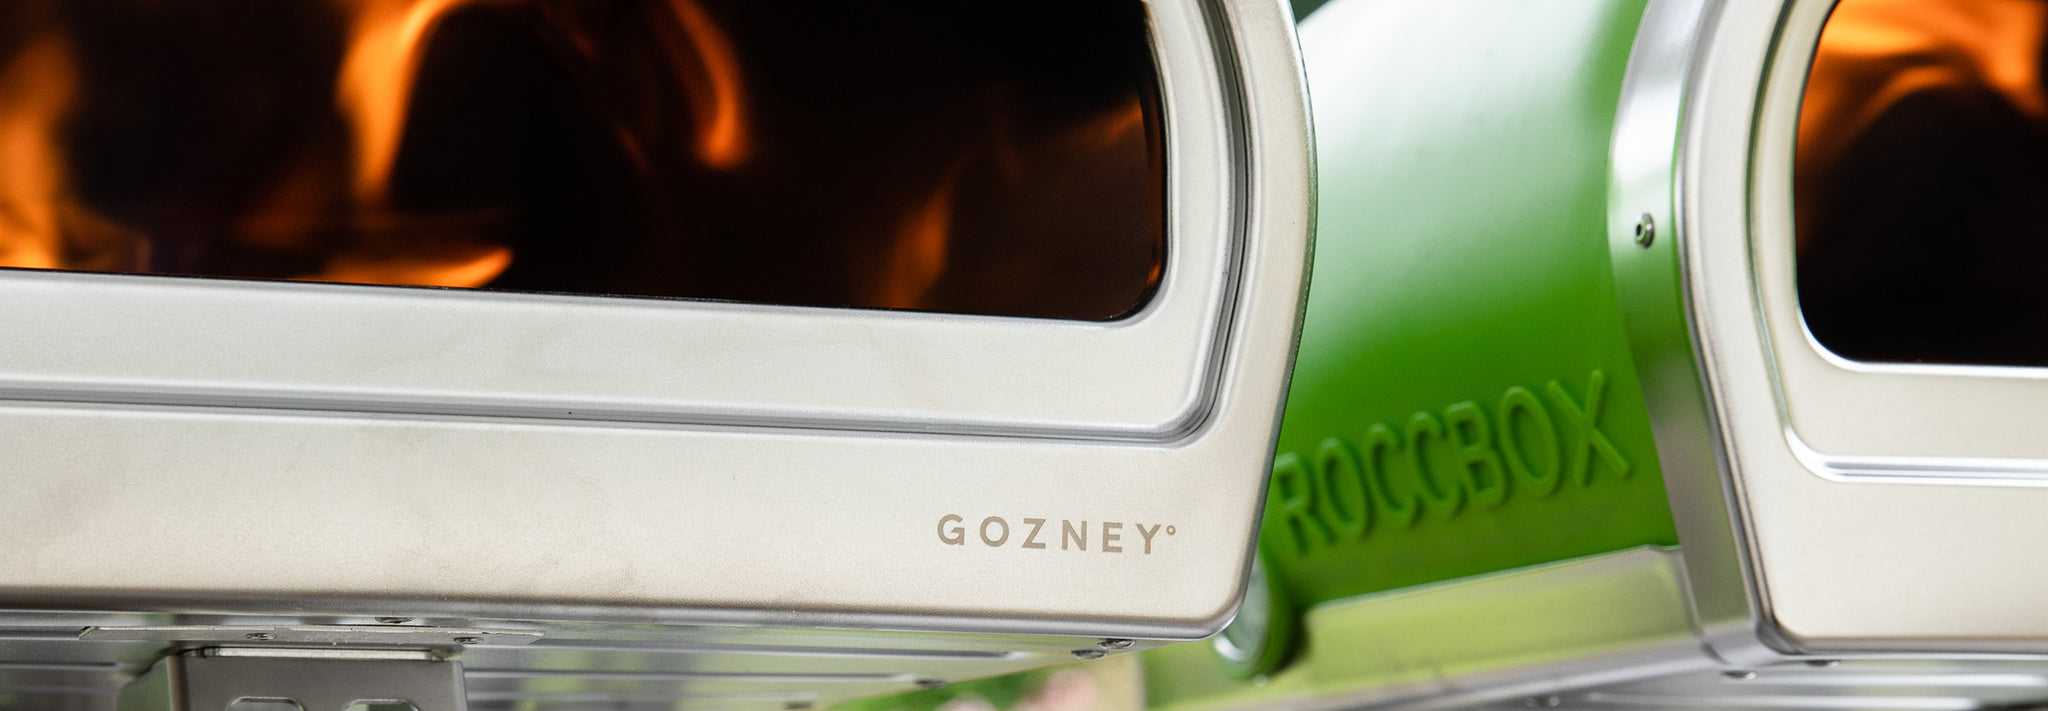 Gozney gives out of work chefs opportunity to earn money at home with a Gozney Roccbox